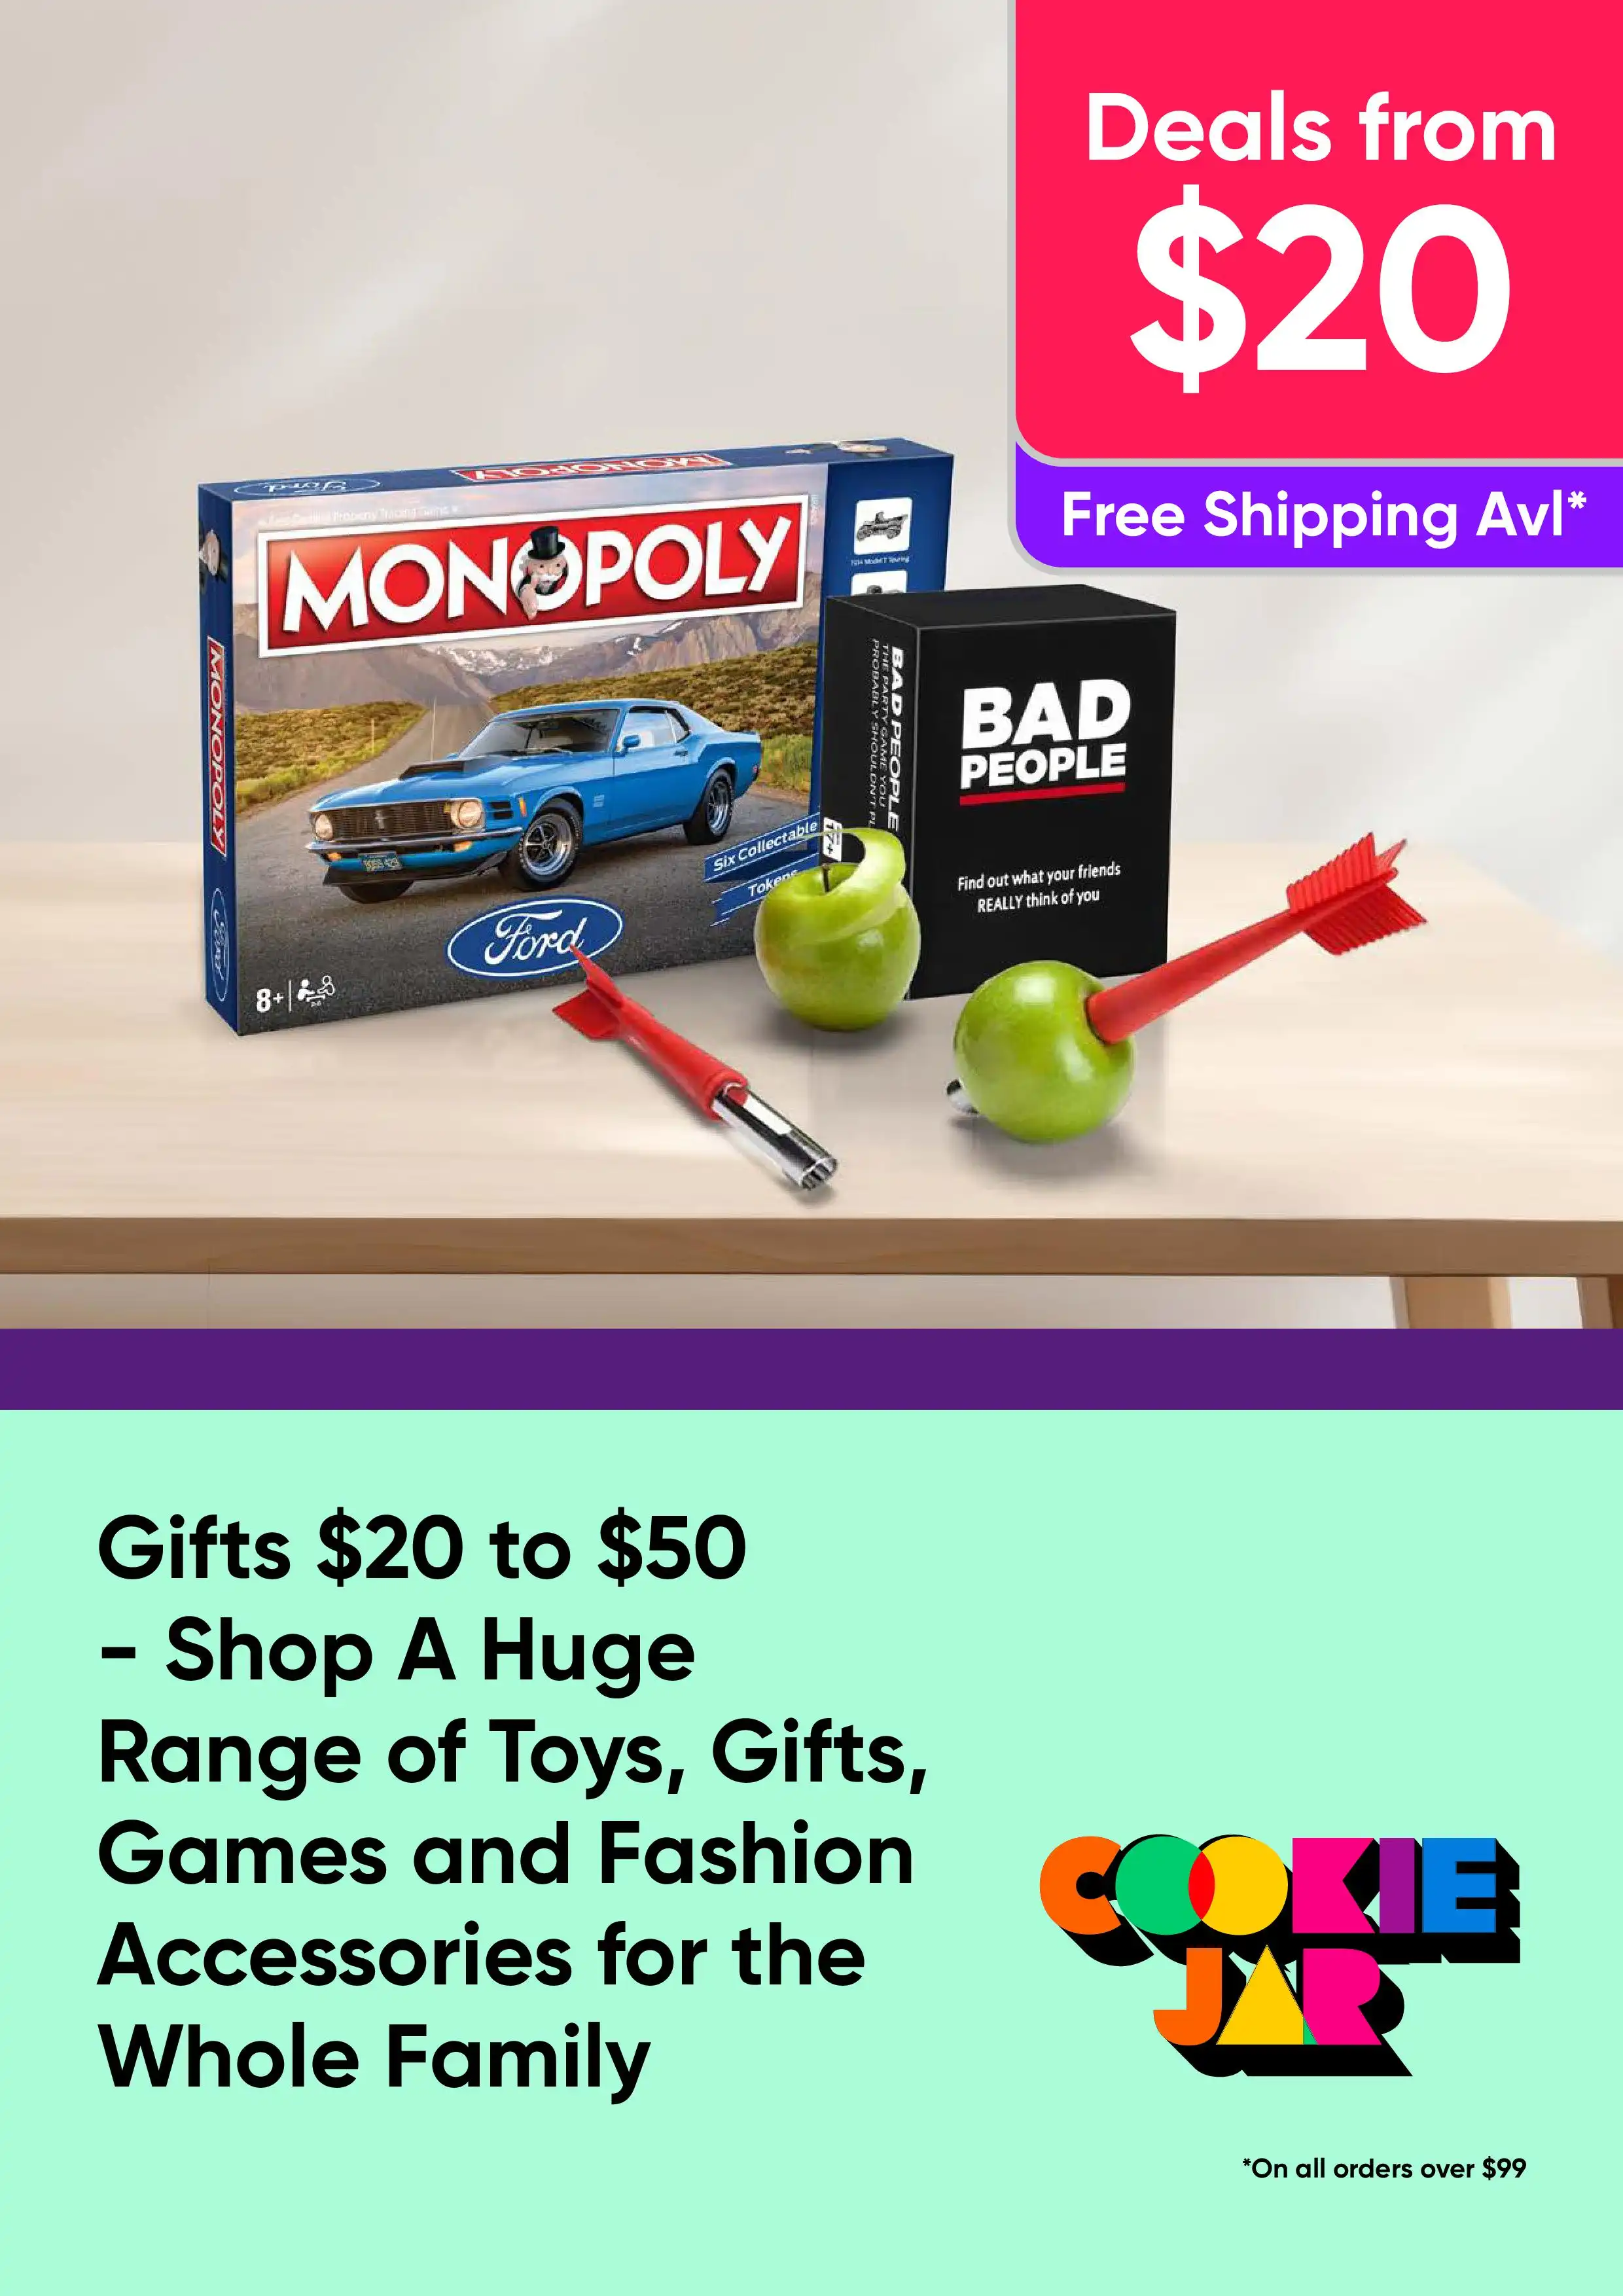 Gifts $20 to $50 - Shop A Huge Range of Toys, Games and Fashion Accessories for the Whole Family